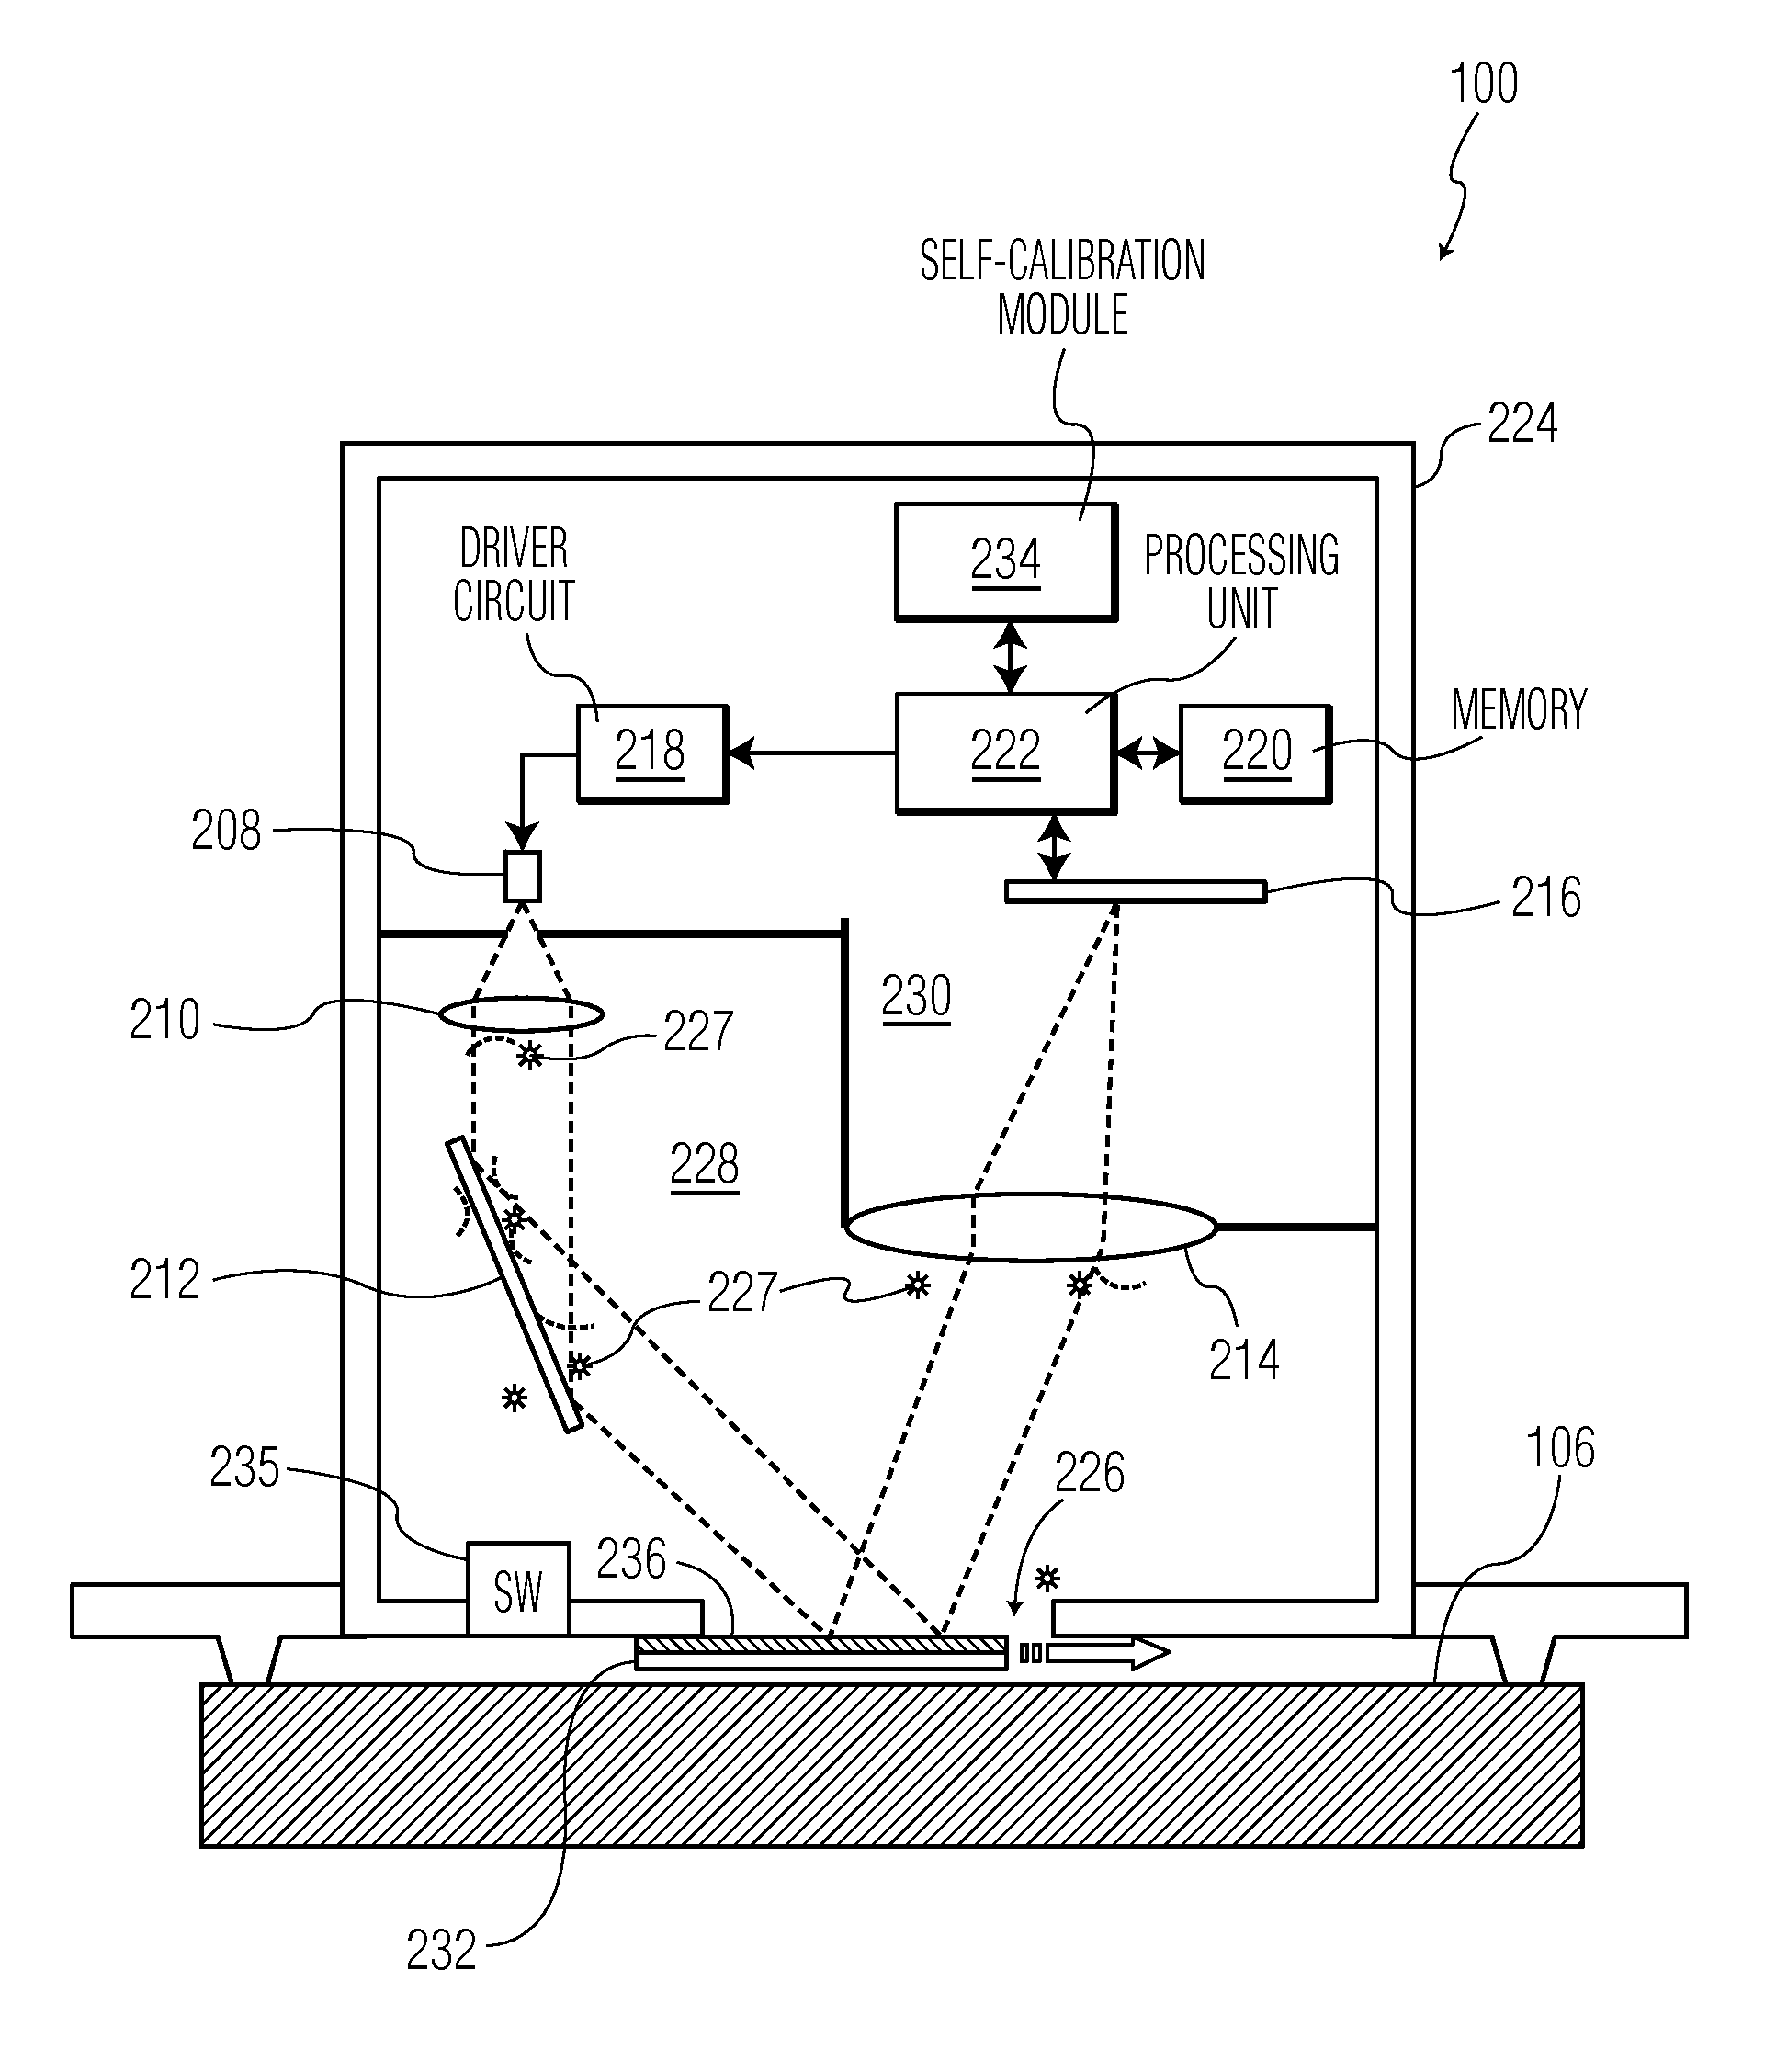 Optical navigation system and method for performing self-calibration on the system using a calibration cover